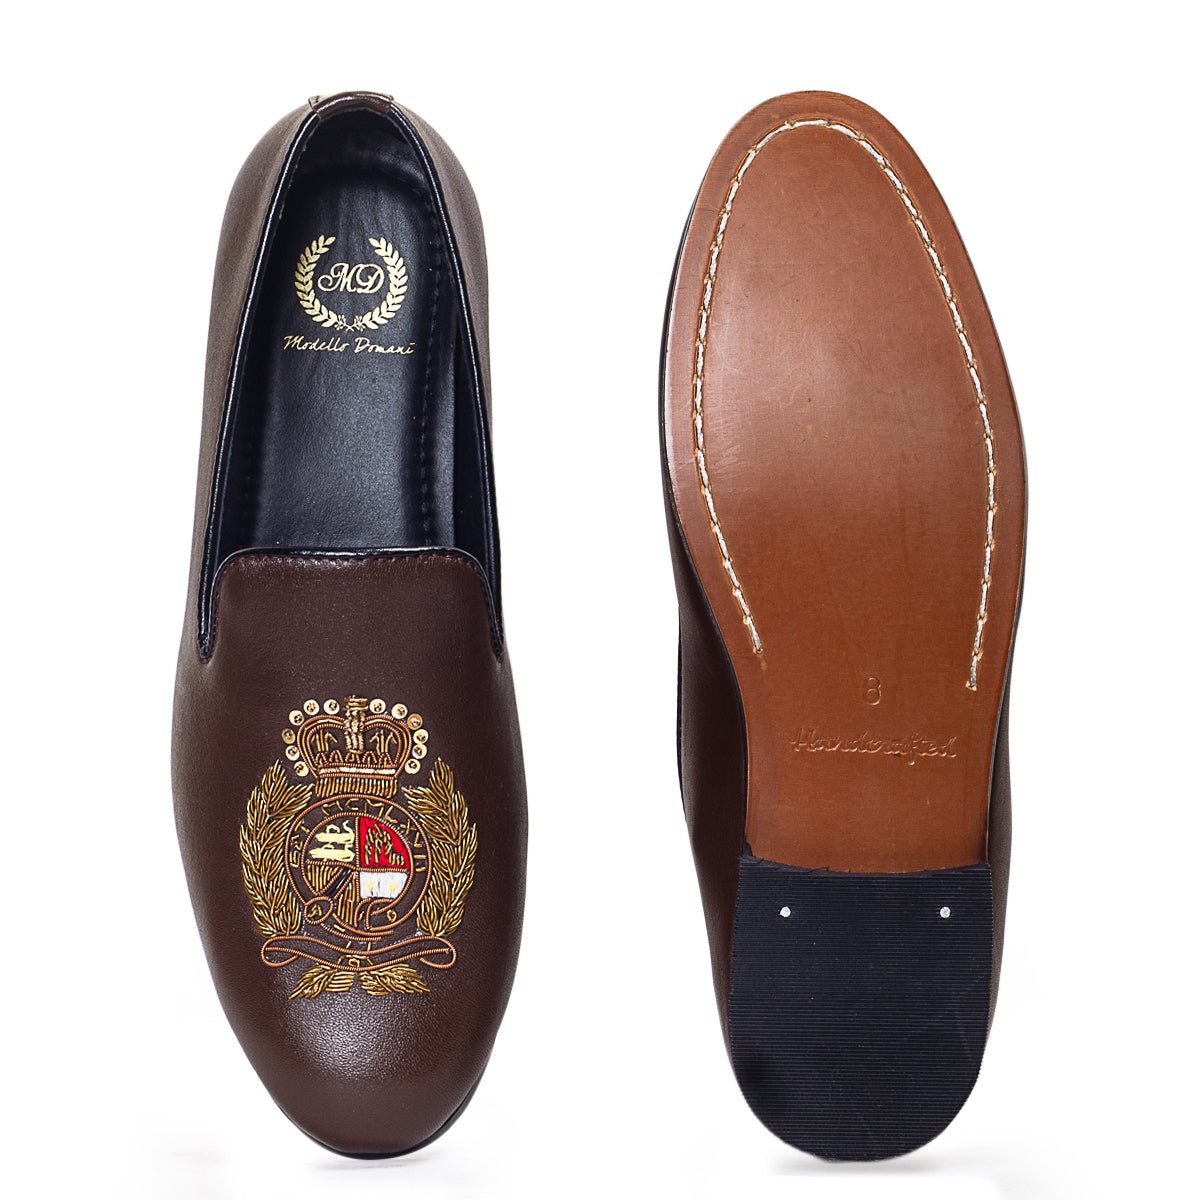 The Regal Crest Leather Slipons (Brown)